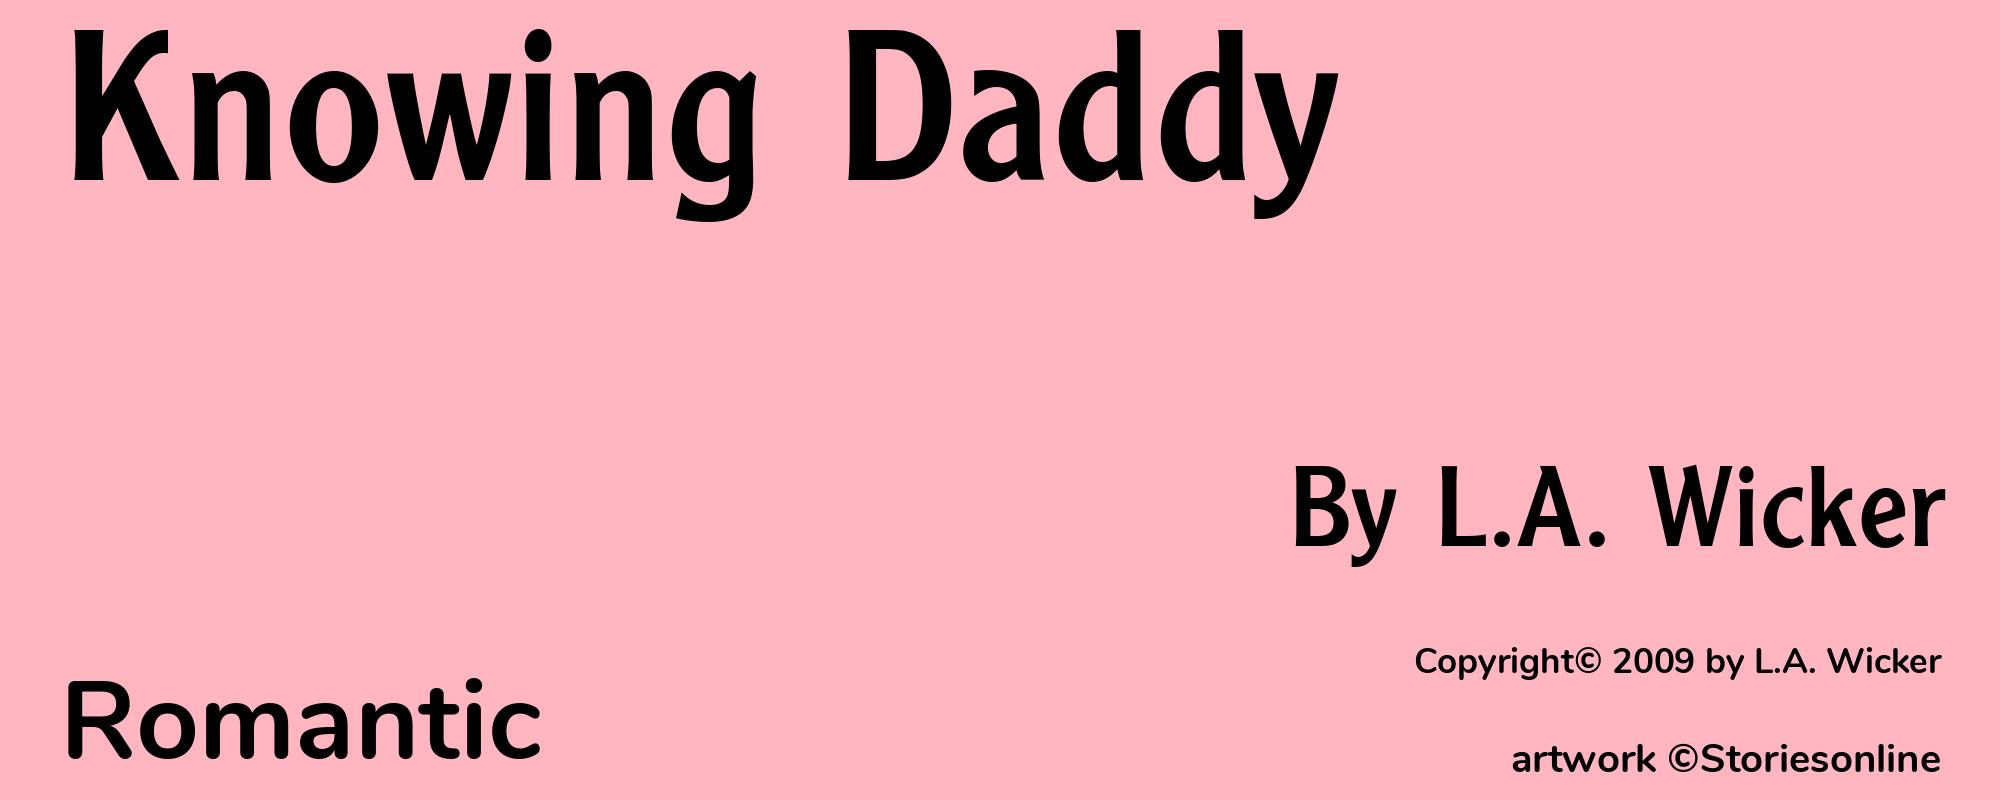 Knowing Daddy - Cover